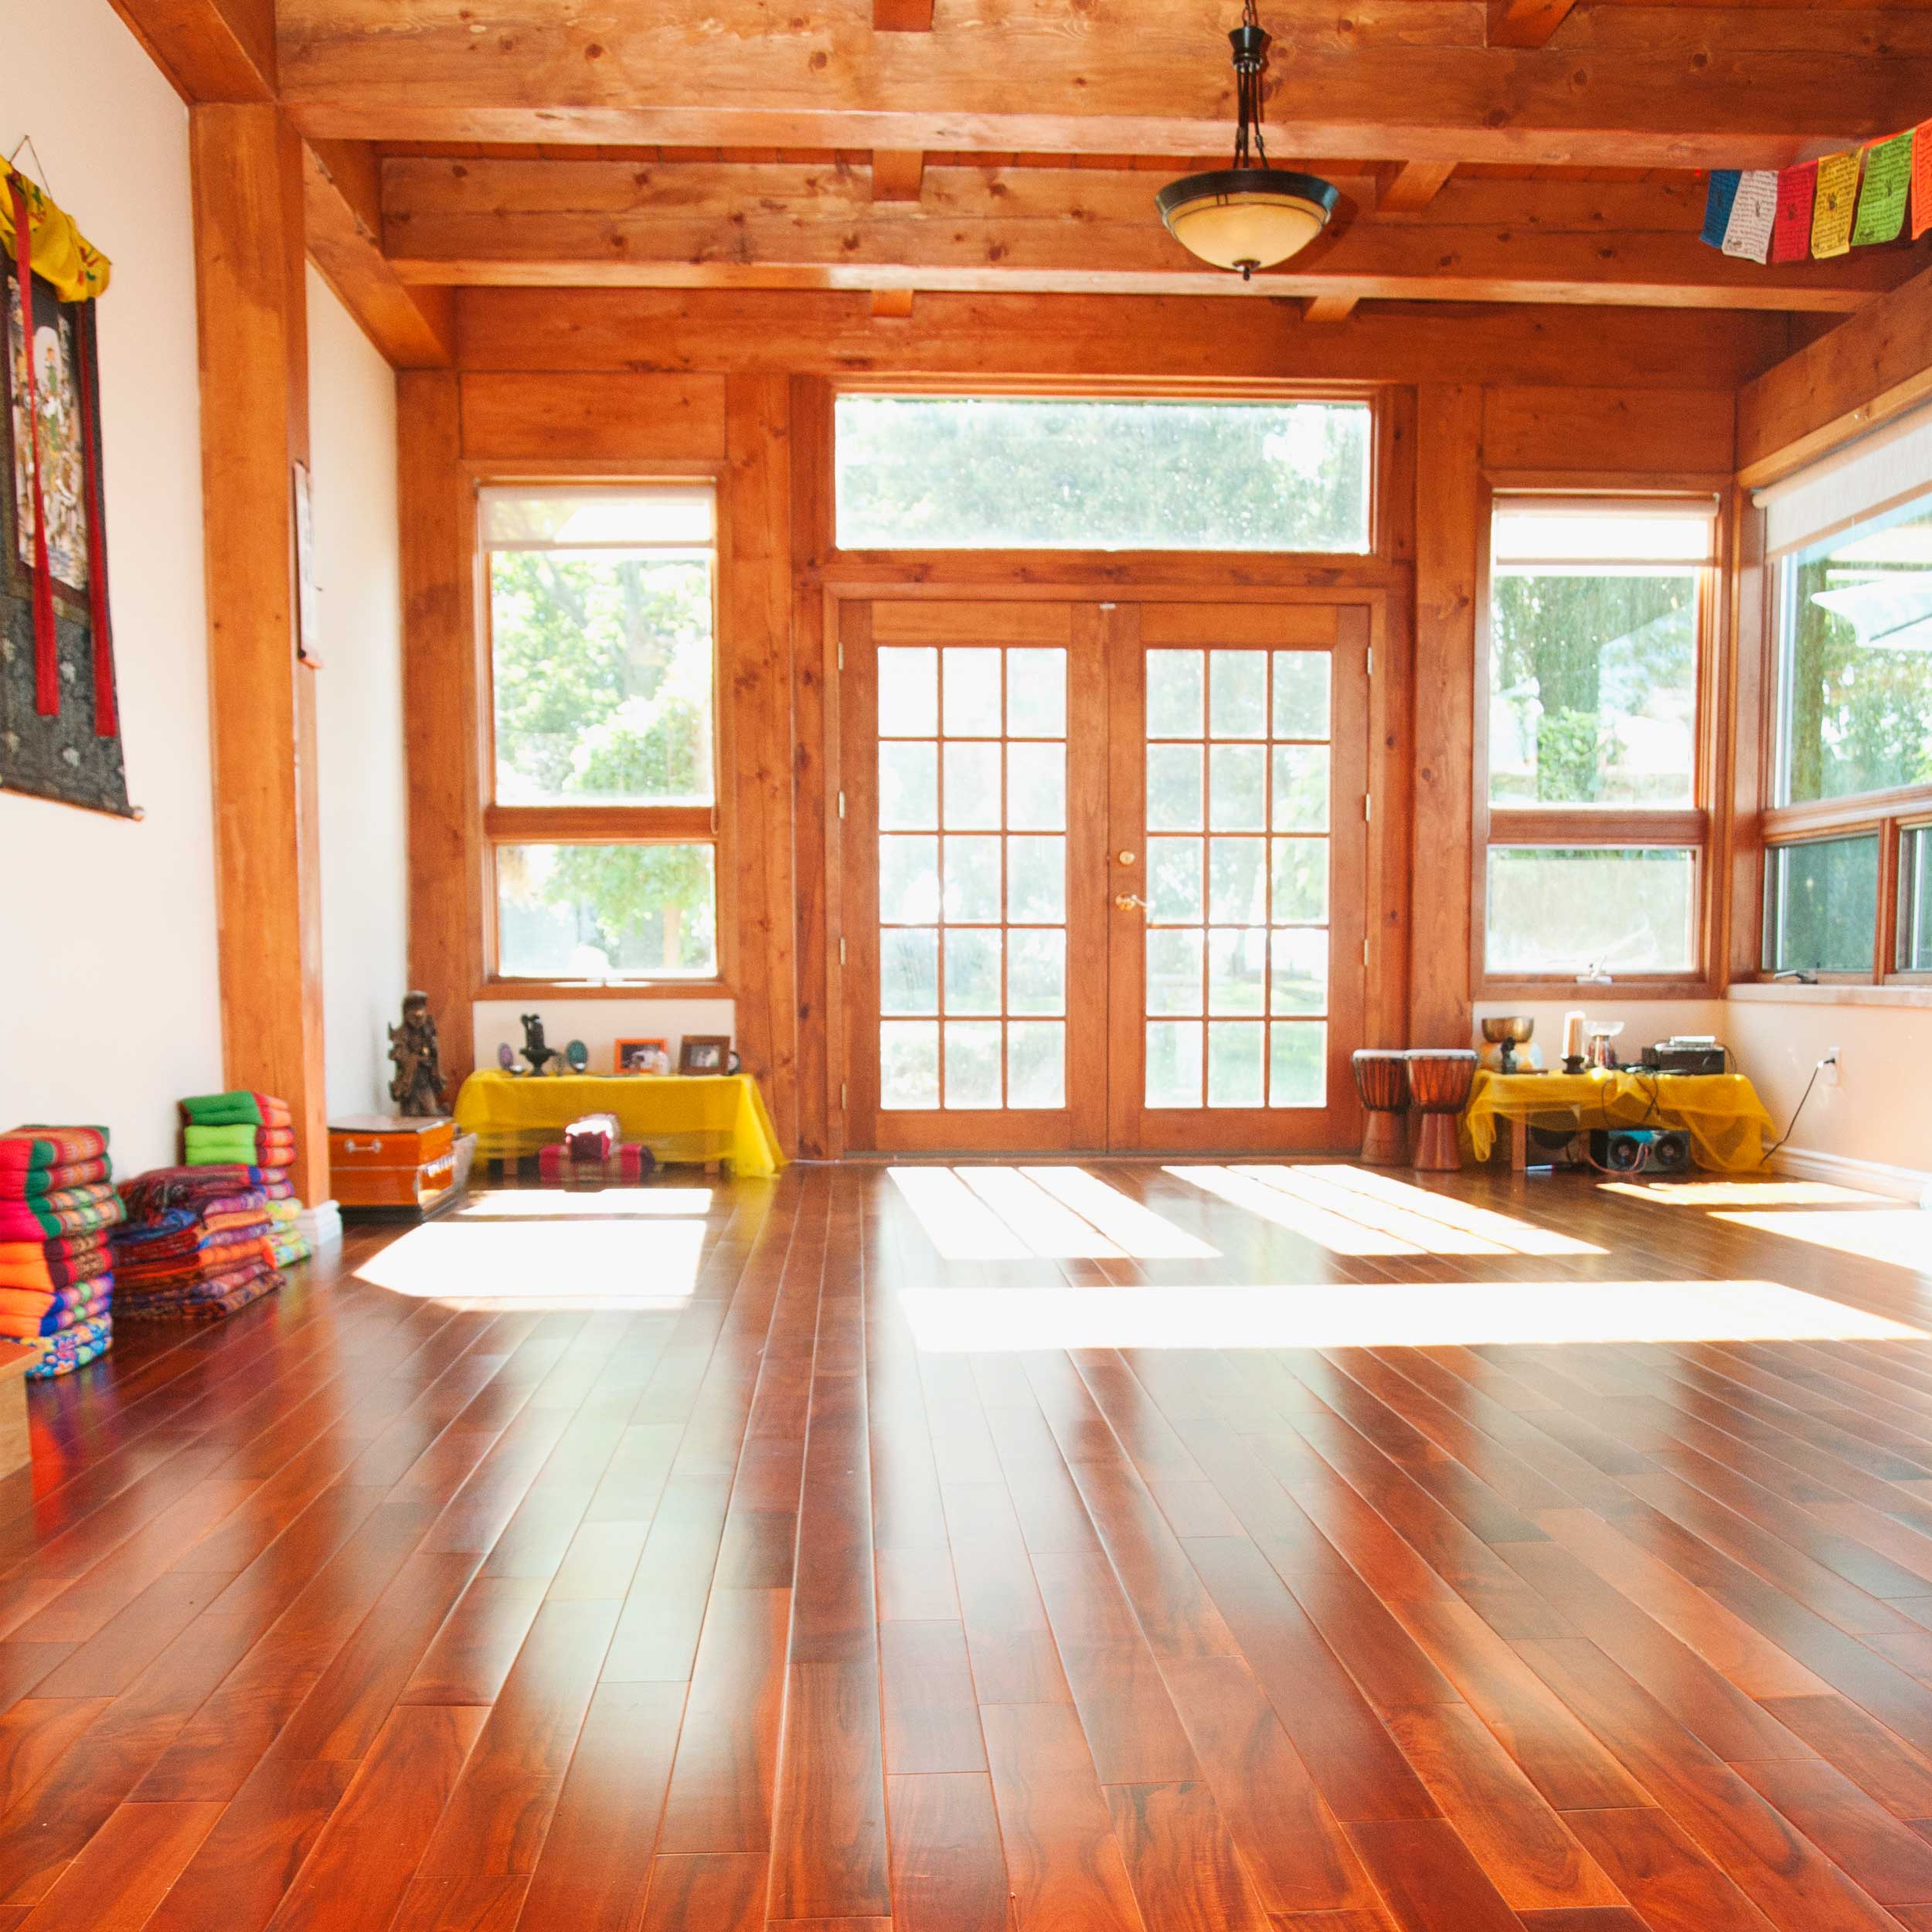 Small details added to a yoga studio space can leave a lasting, positive impression. It can welcome newcomers into the community and increase retention of existing clientele. Here are 5 simple ideas you could incorporate into your teaching today to do just that!